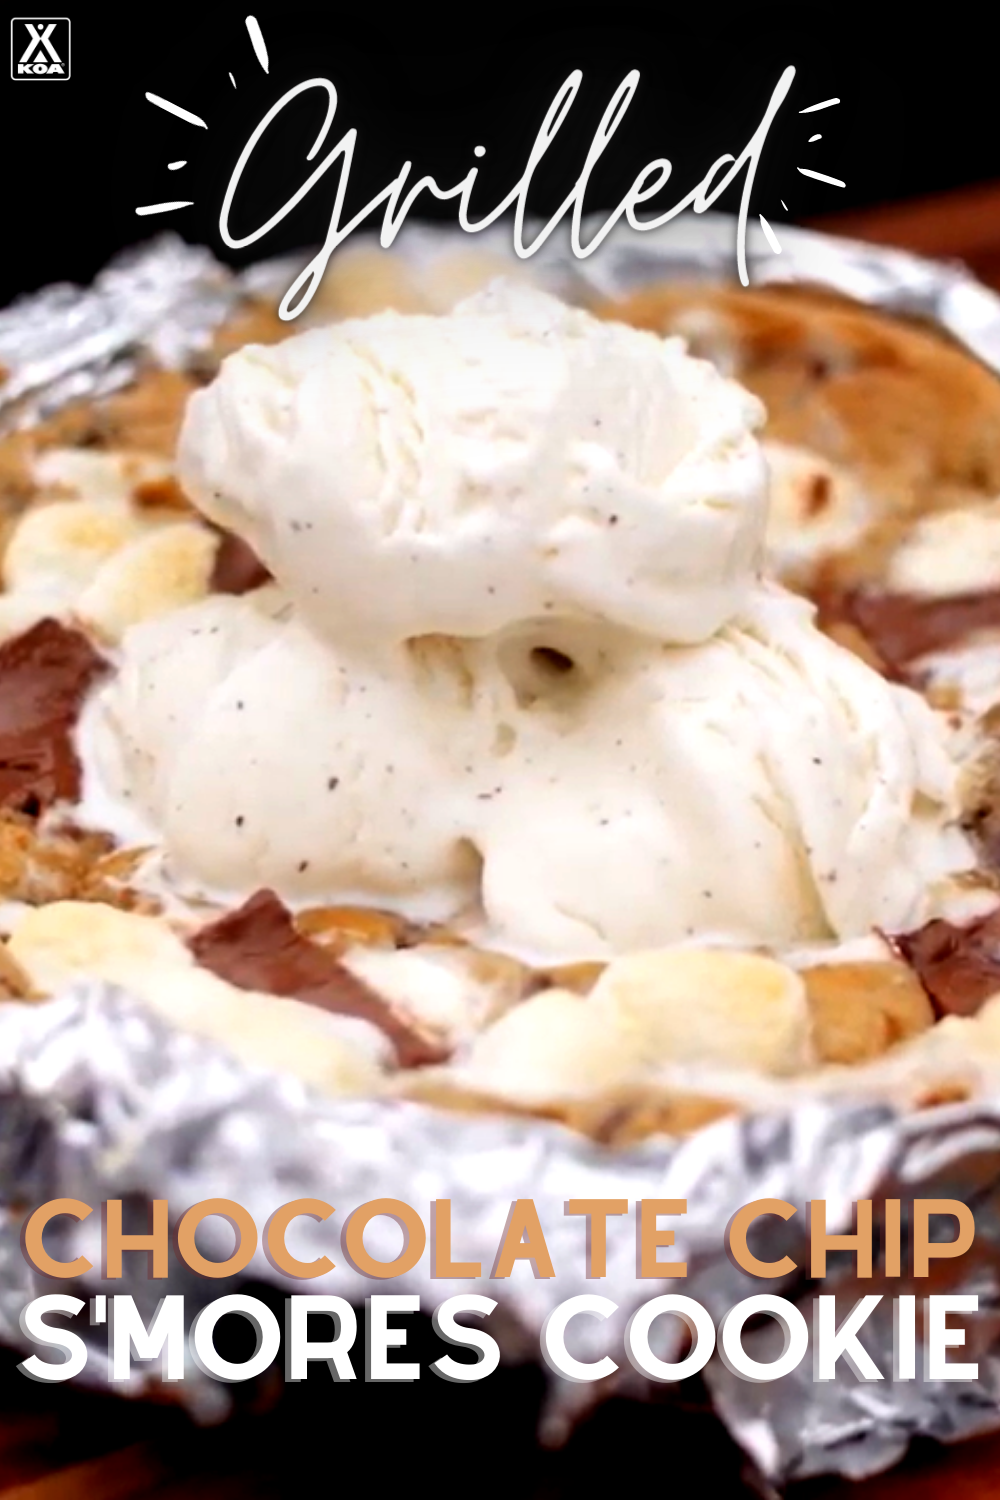 Make this twist on s'mores that sure to impress your camping friends. This grilled chocolate chip s'mores cookie is sure to become a favorite camping dessert.